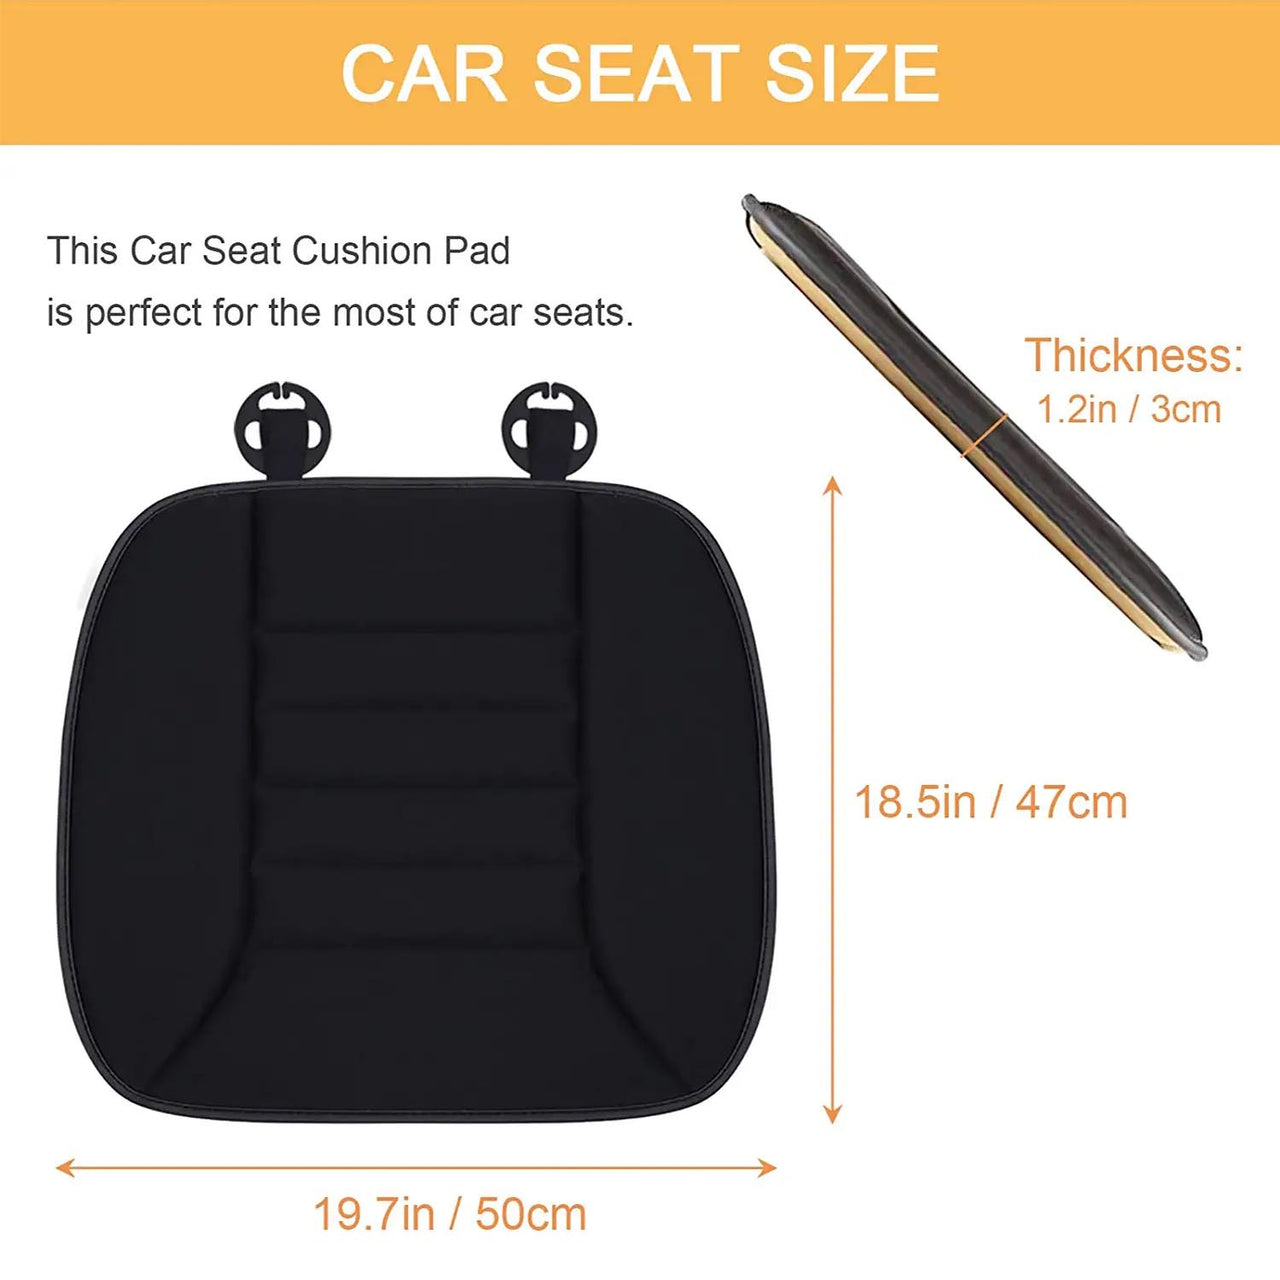 Car Seat Cushion with 1.2inch Comfort Memory Foam, Custom Logo For Your Cars, Seat Cushion for Car and Office Chair KX19989